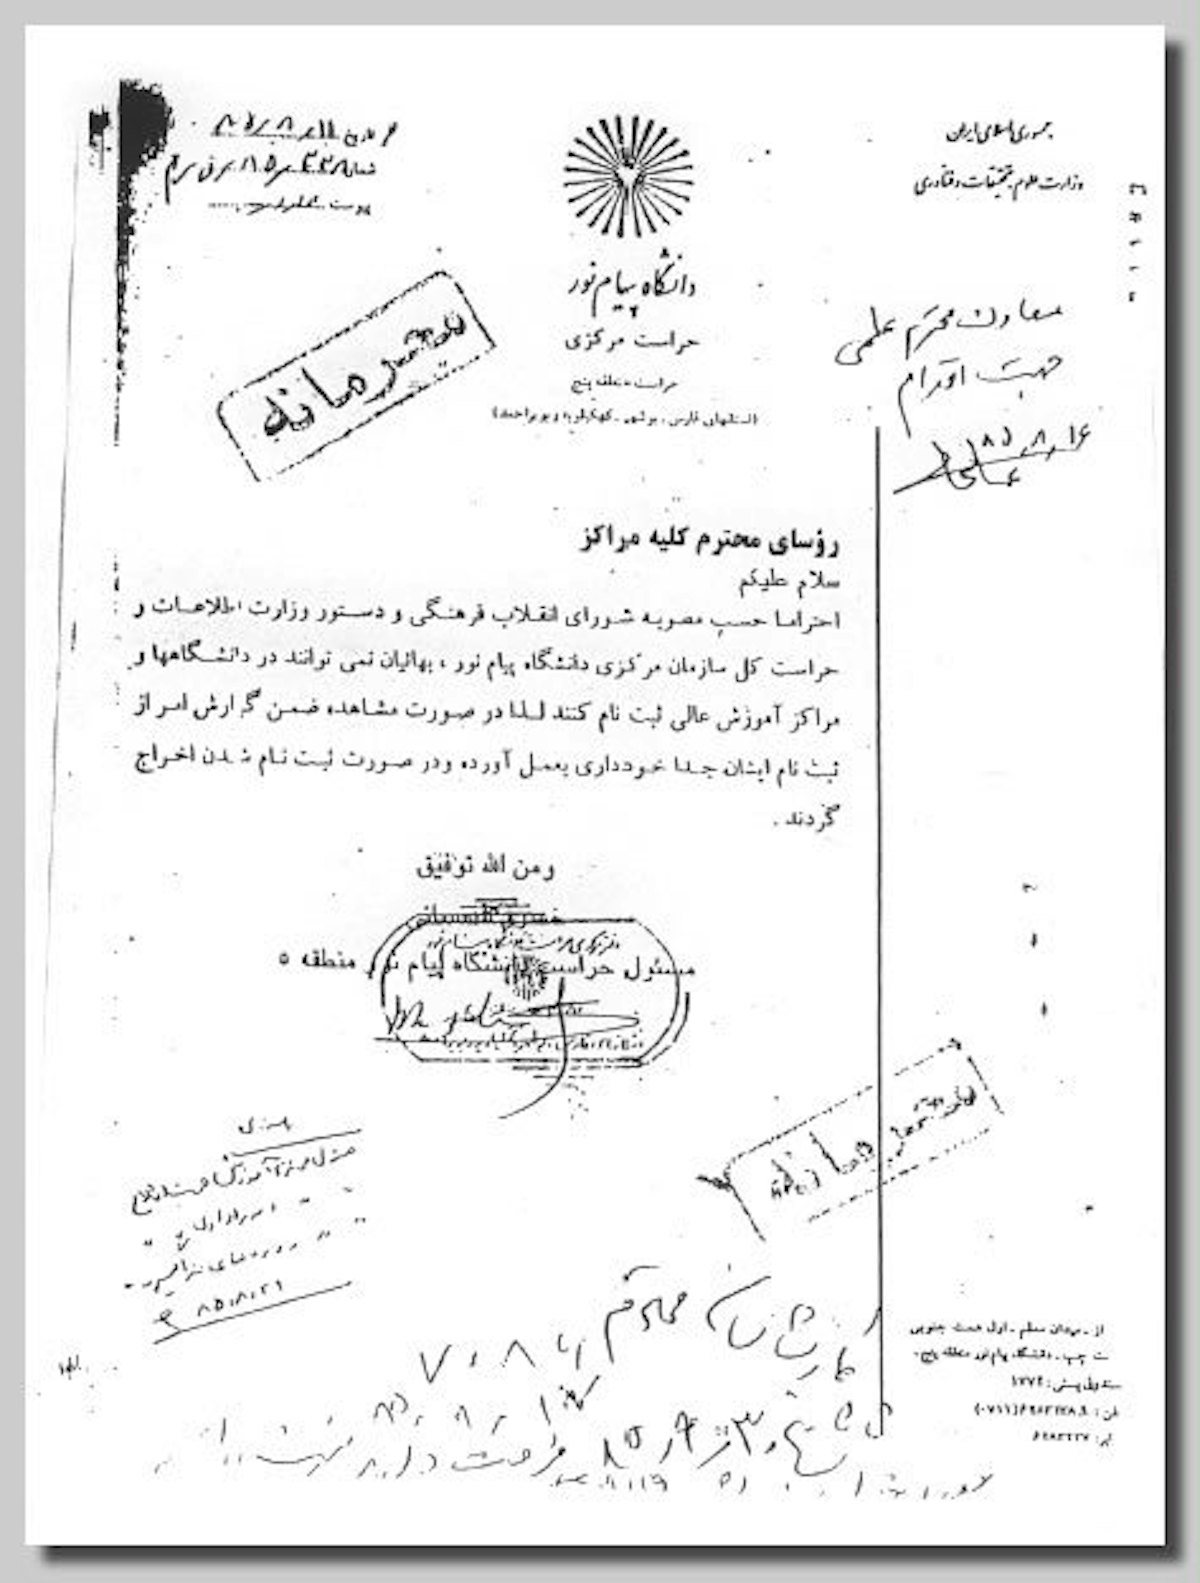 A letter dated 2 November 2006 – issued on the letterhead of Iran's Ministry of Science, Research and Technology – in which Payame Noor University's Central Protection Office told its regional branches that it is official policy that "Baha'is cannot enroll in universities and higher education centres" and "if they are already enrolled they should be expelled."